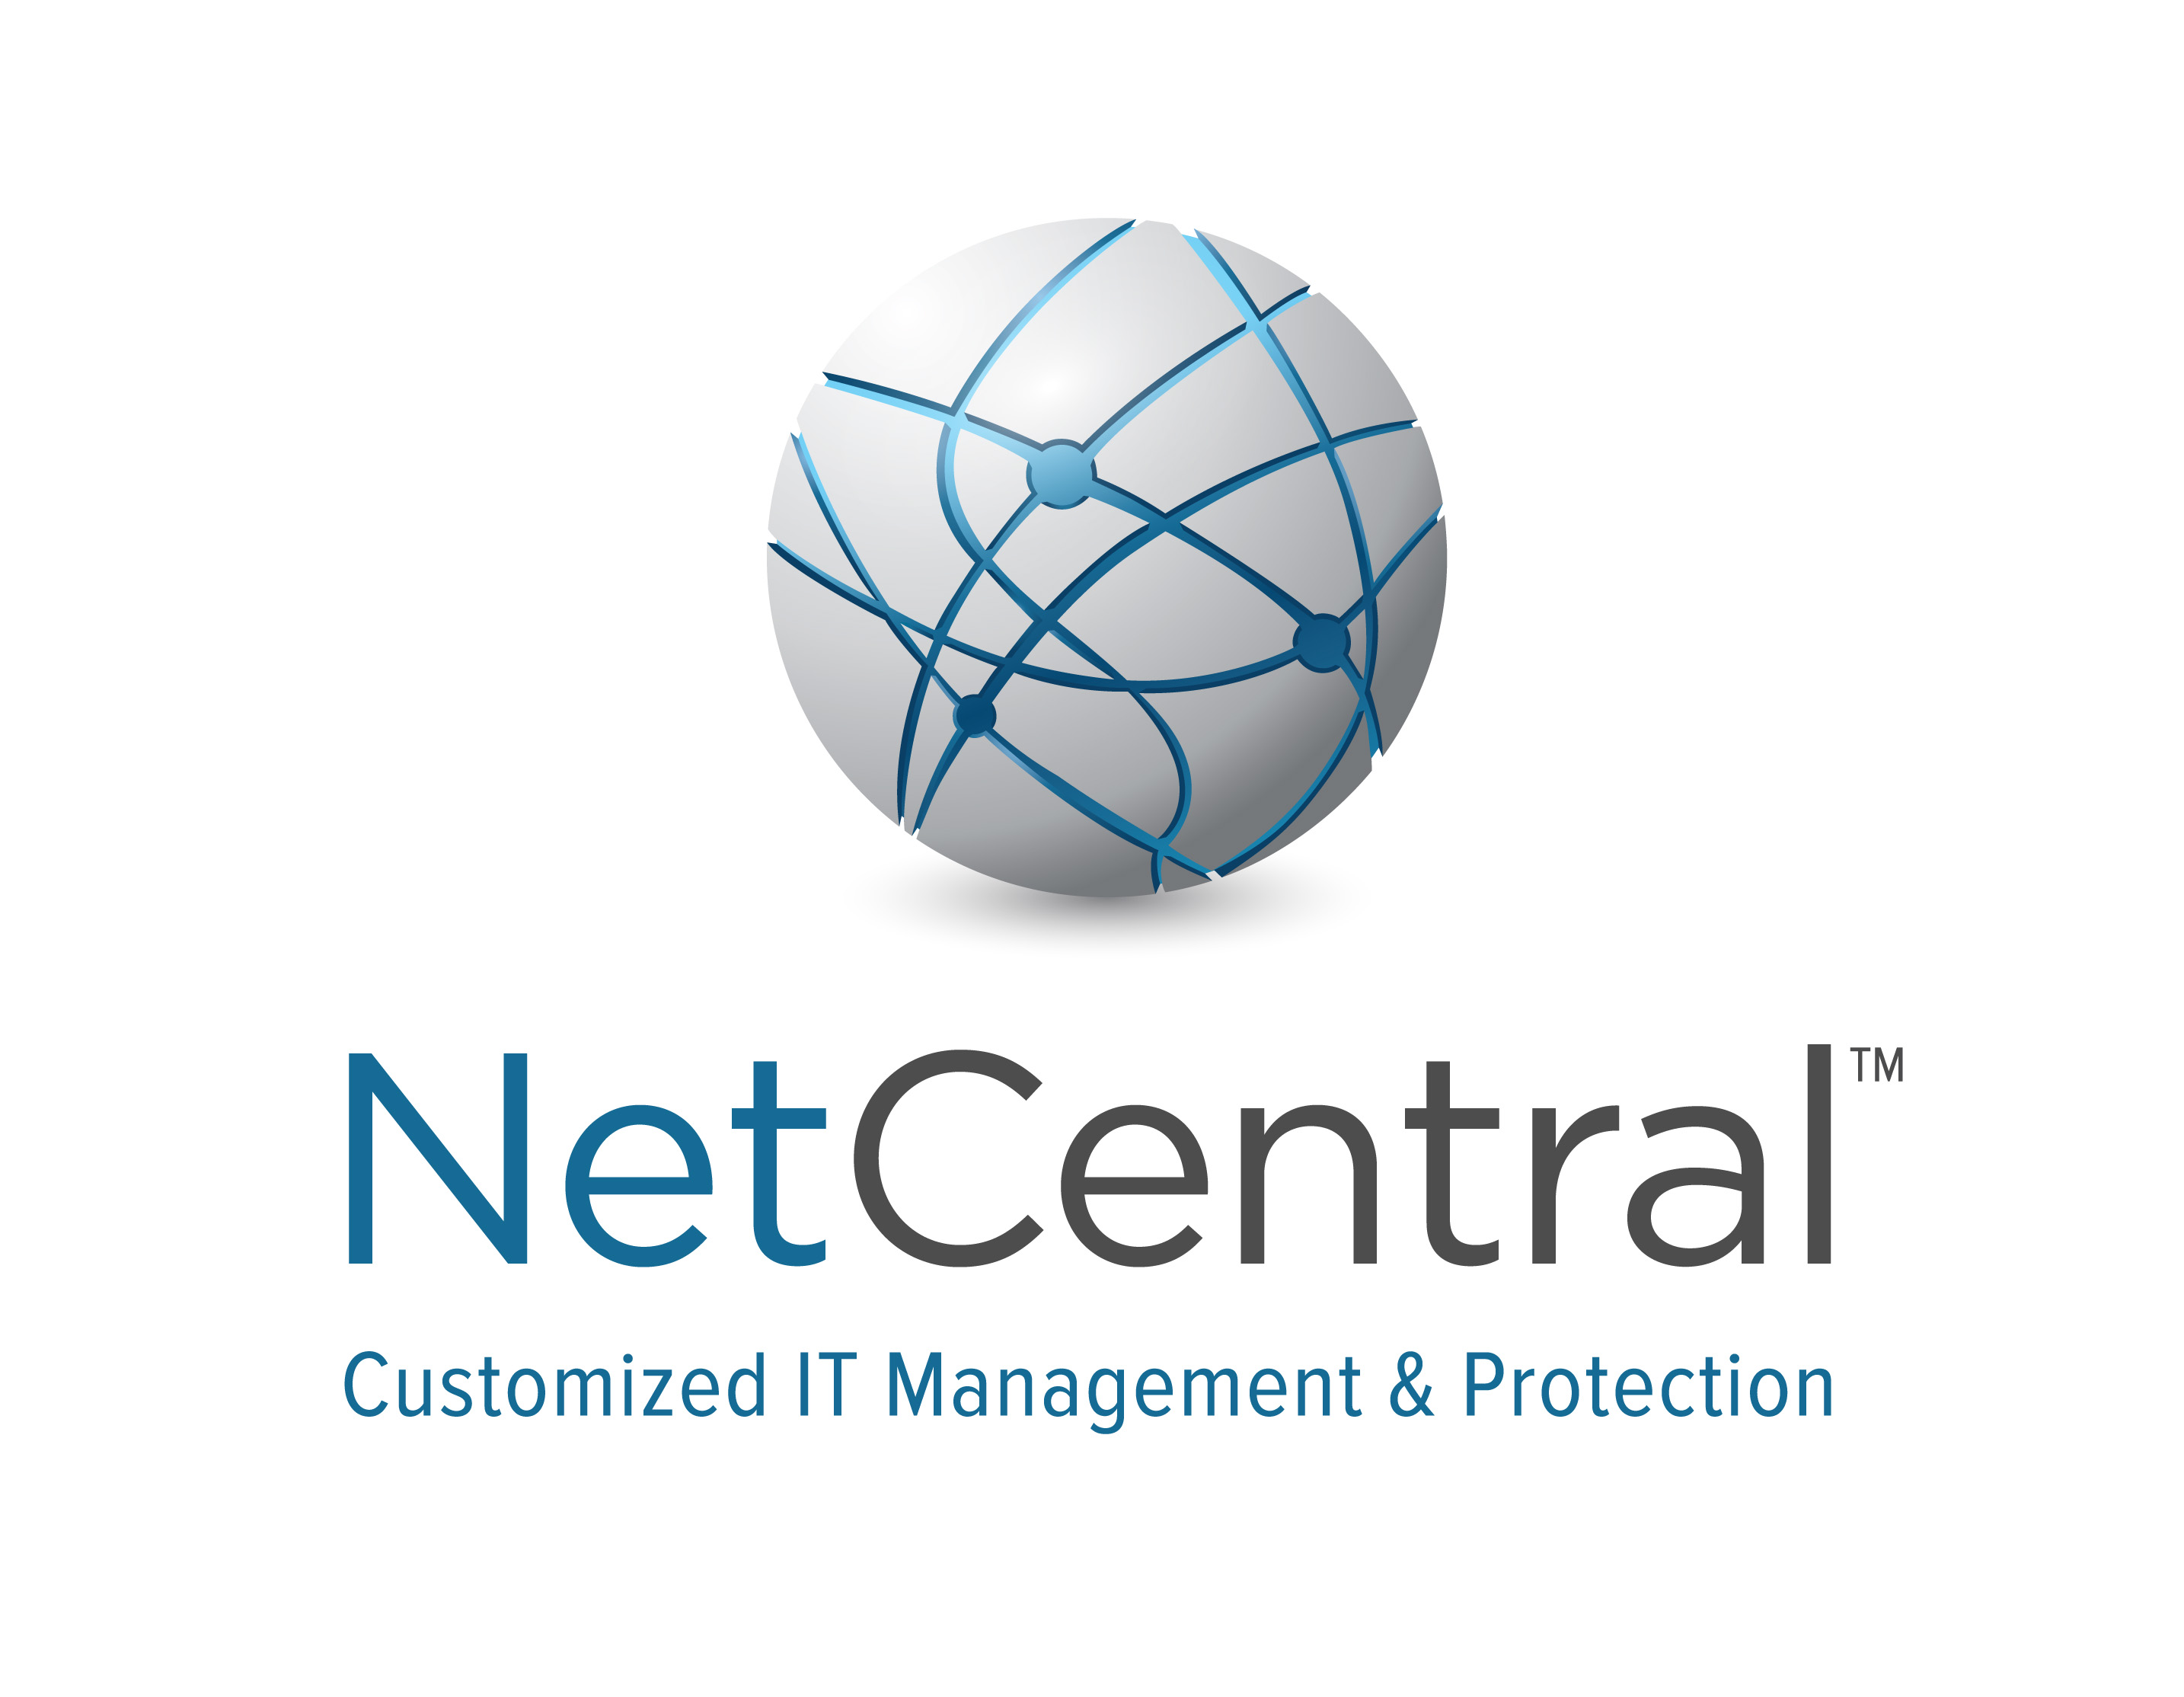 NetCentral is a Managed Services Provider Solution